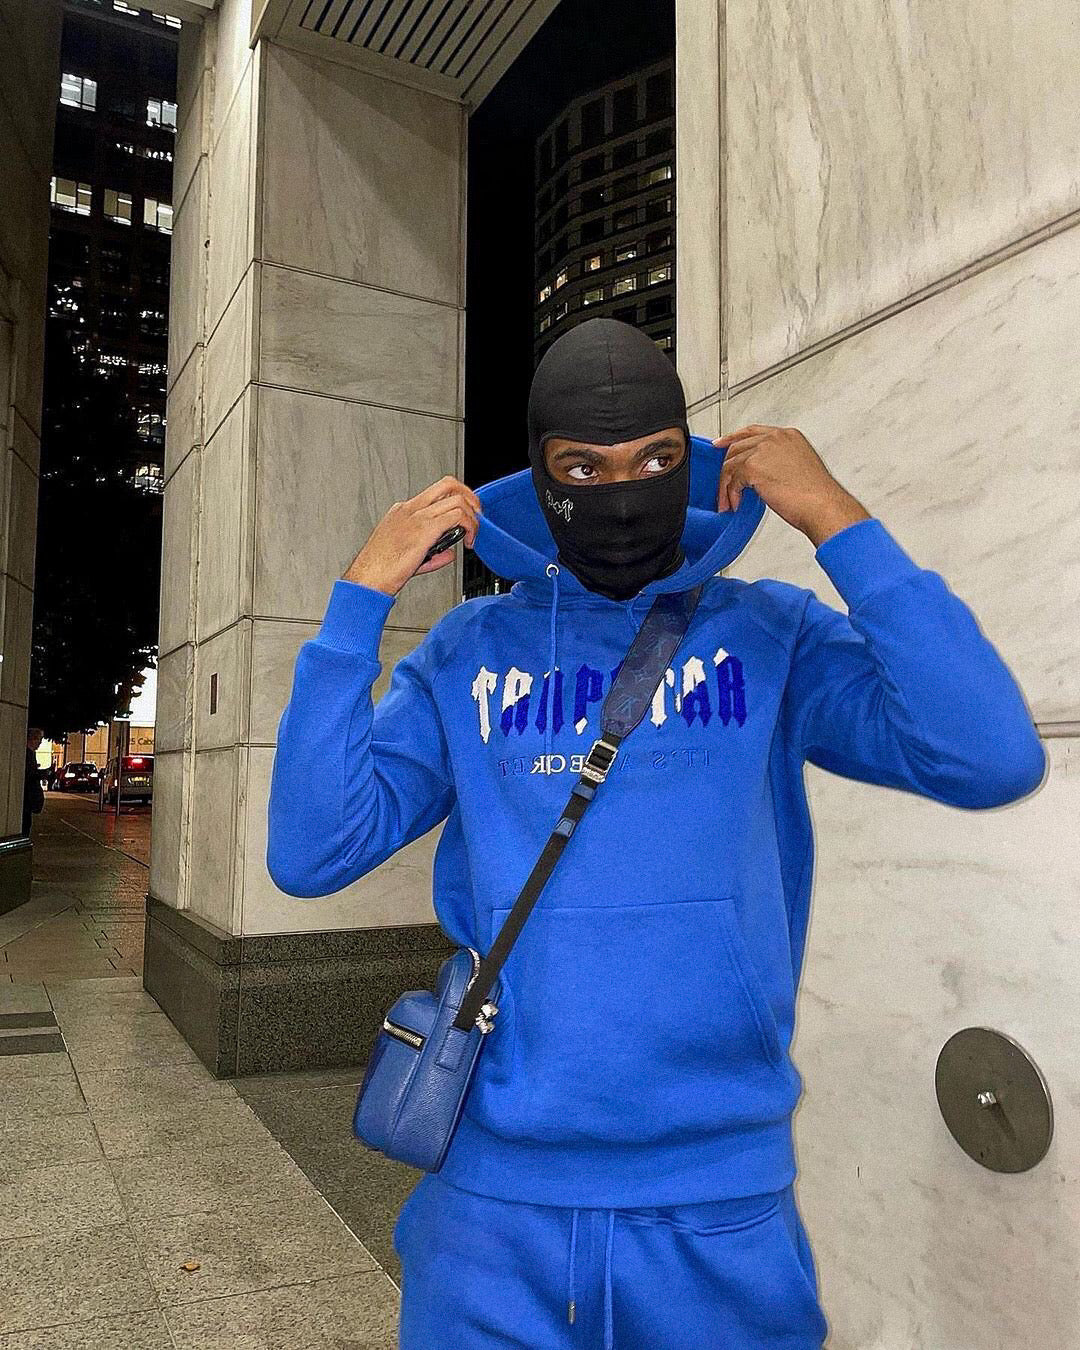 Trapstar Decoded Blue Tracksuit